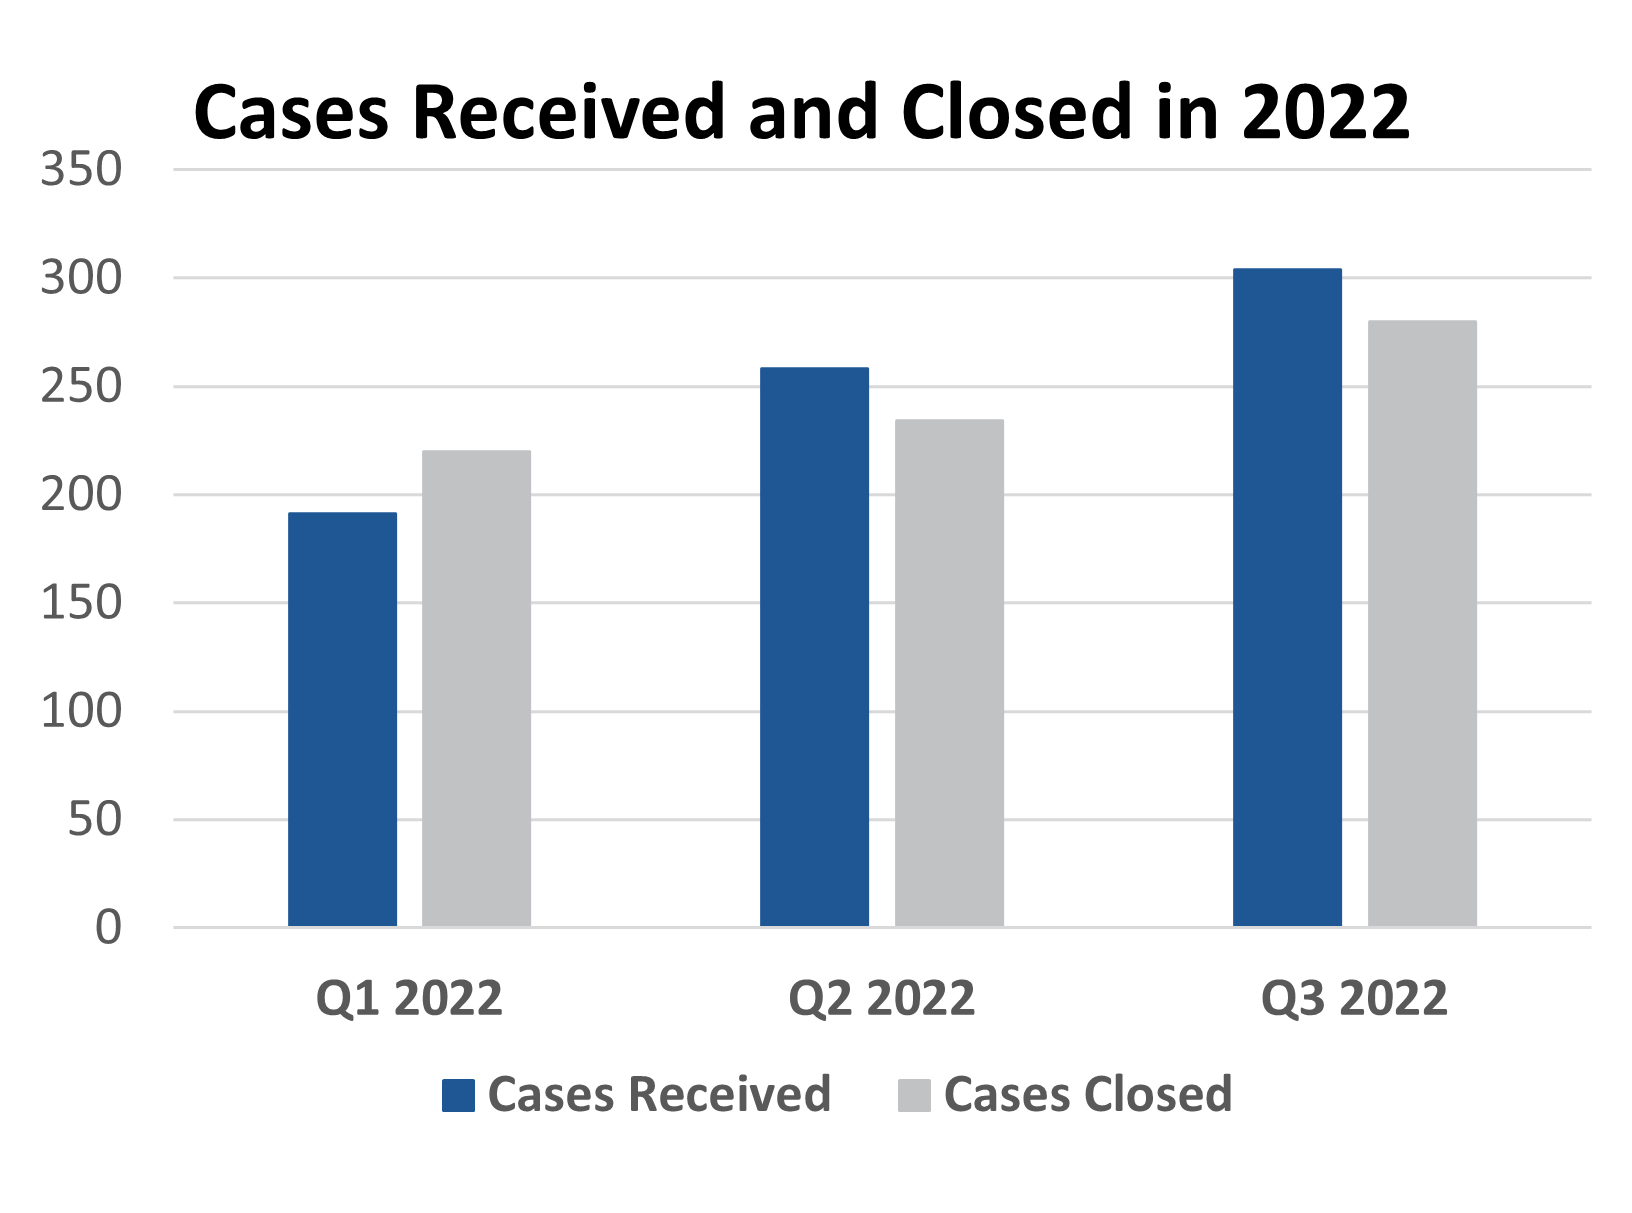 This graph shows the cases received and closed in each quarter of 2022. Q3 has the highest number.